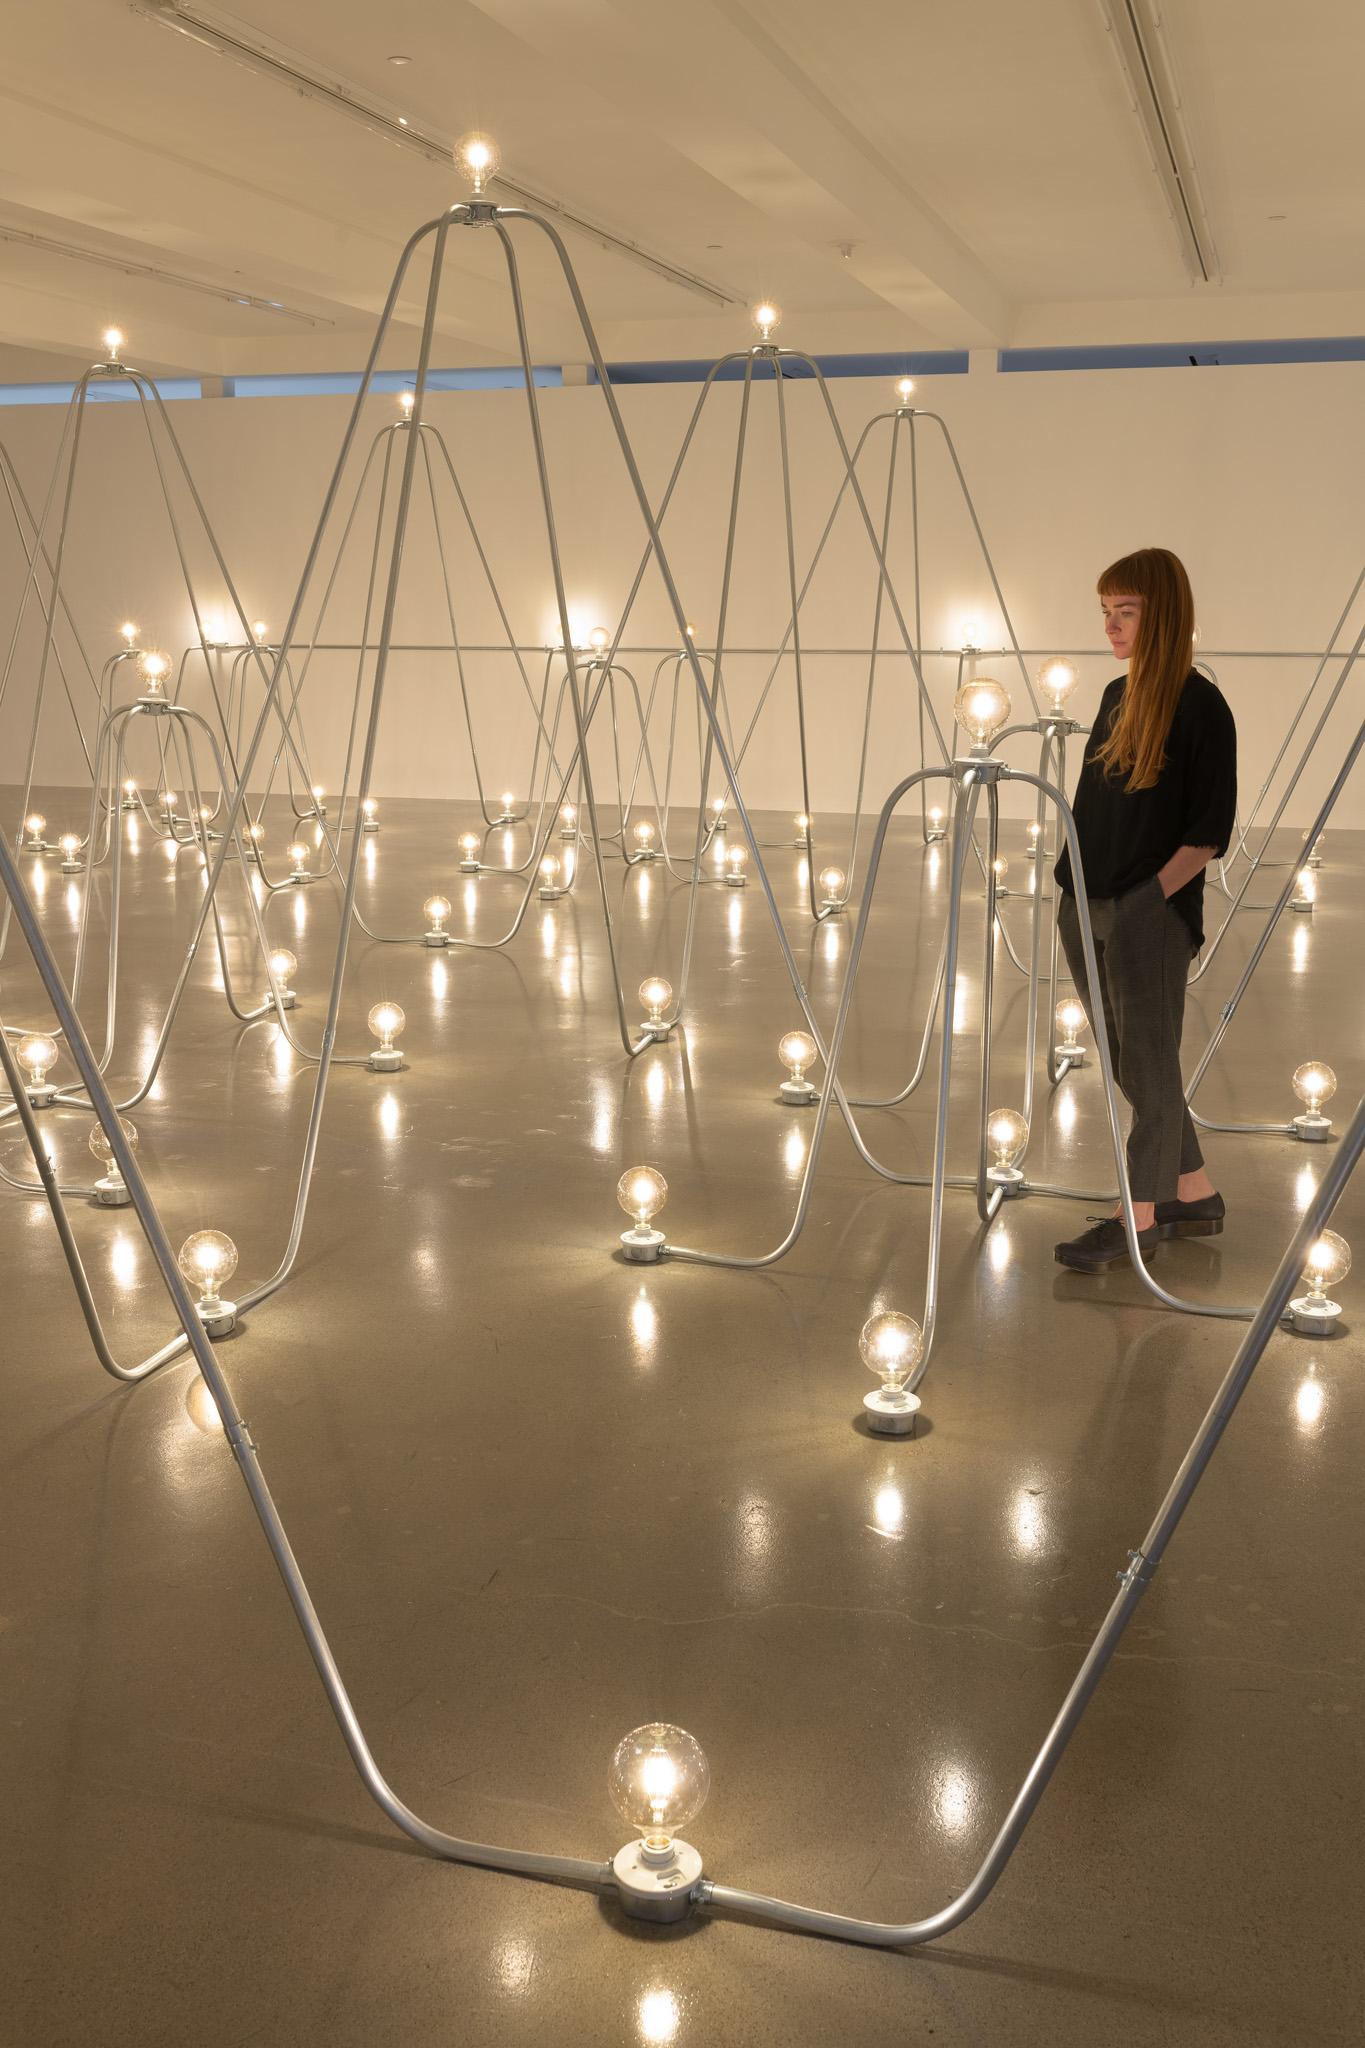 Nancy Holt's sculpture Electrical System, made of metal conduit and lightbulbs, in an exhibition